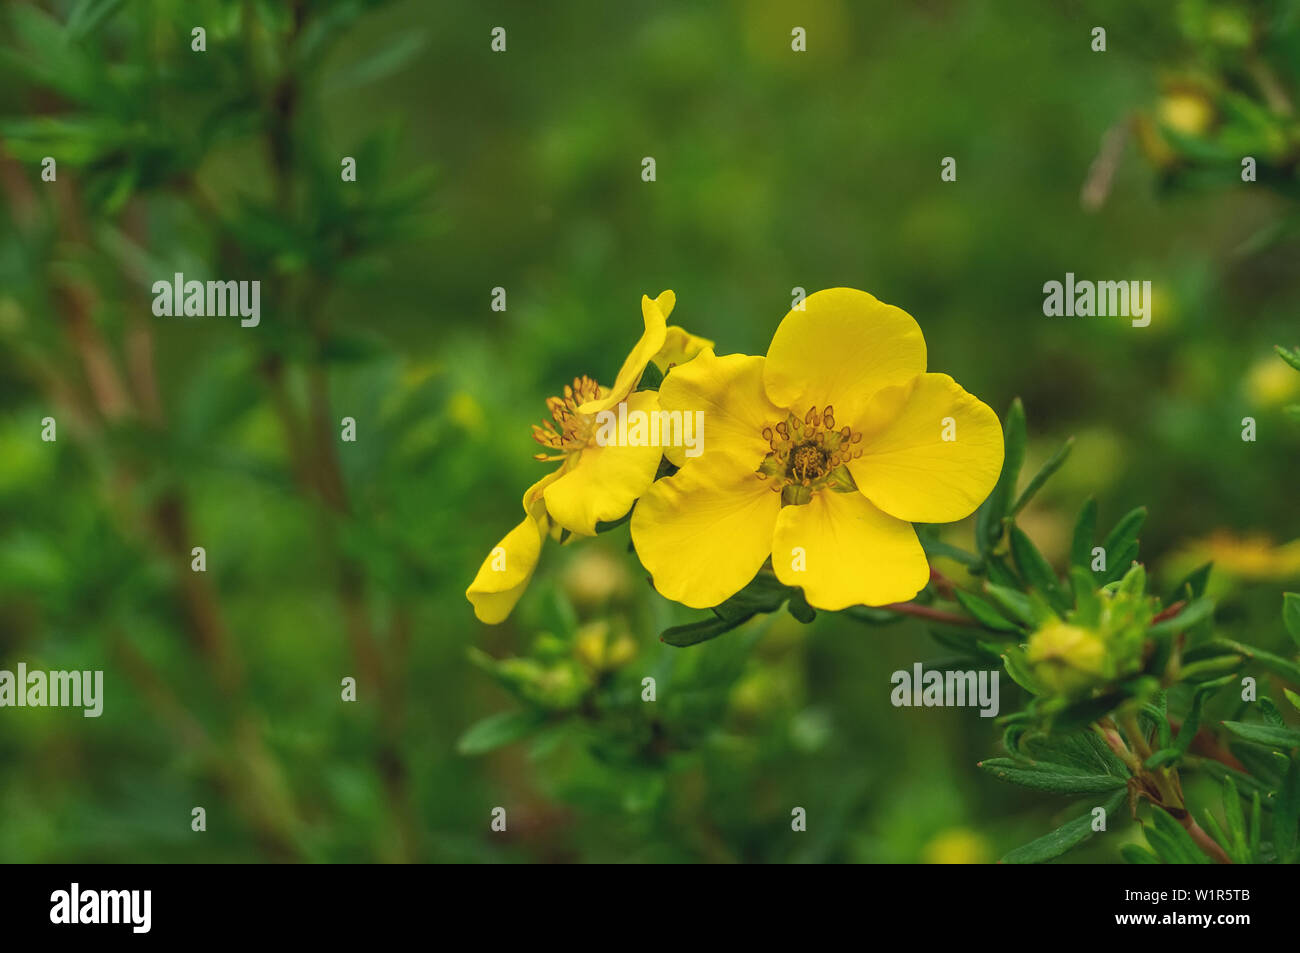 Close-up of yellow flowers. Lovely yellow medicinal flower on green background. Copy space. Stock Photo